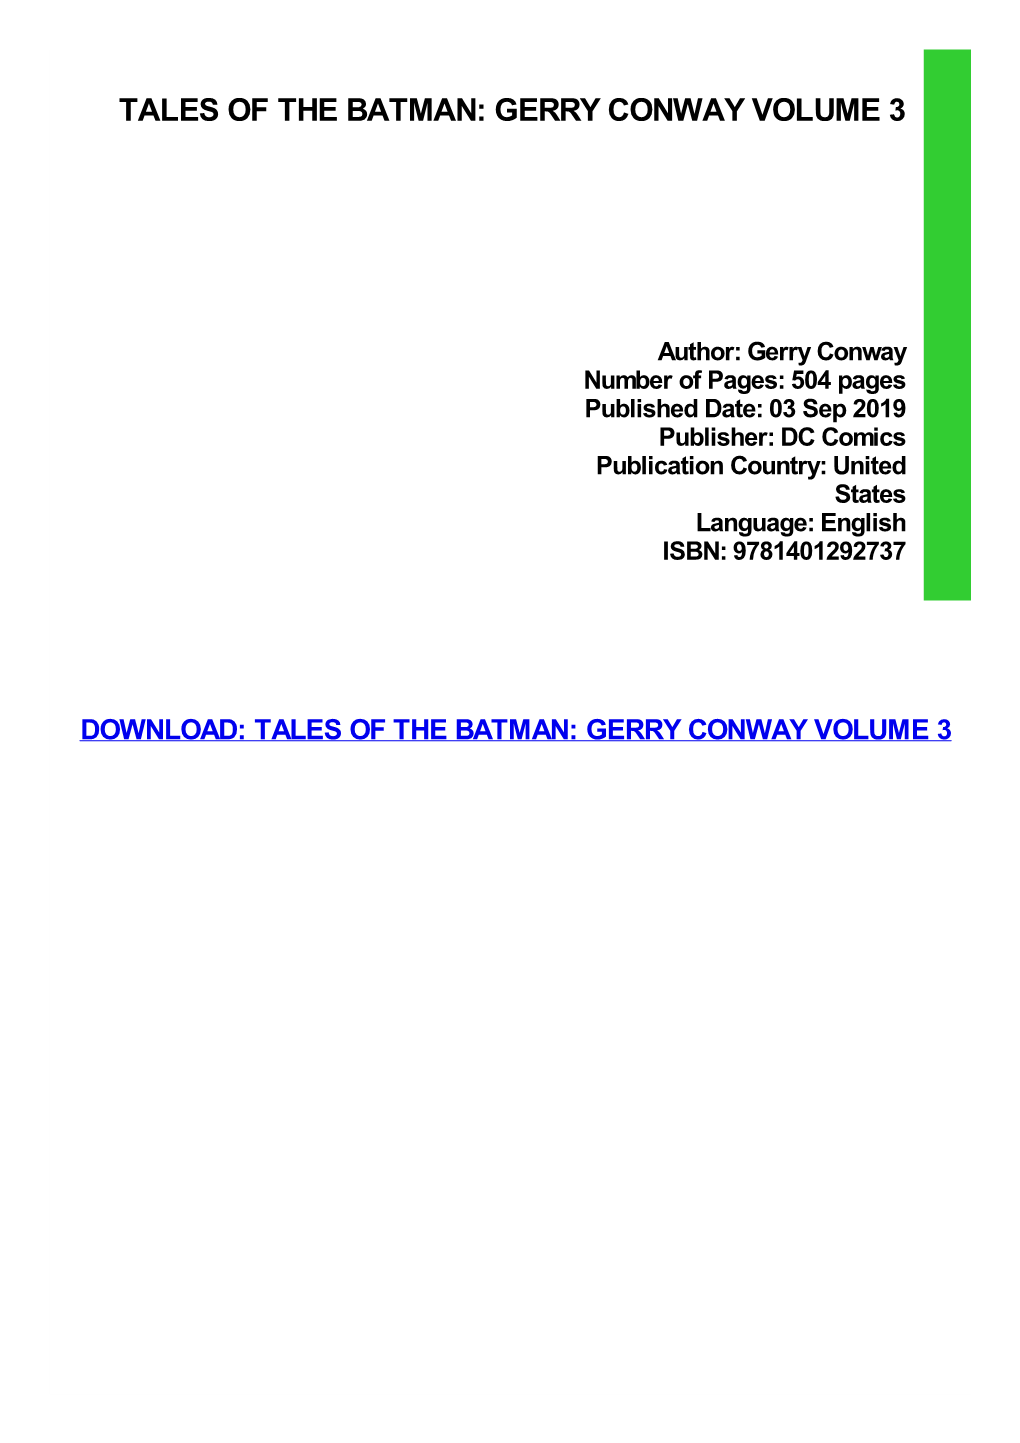 {Download PDF} Tales of the Batman: Gerry Conway Volume 3